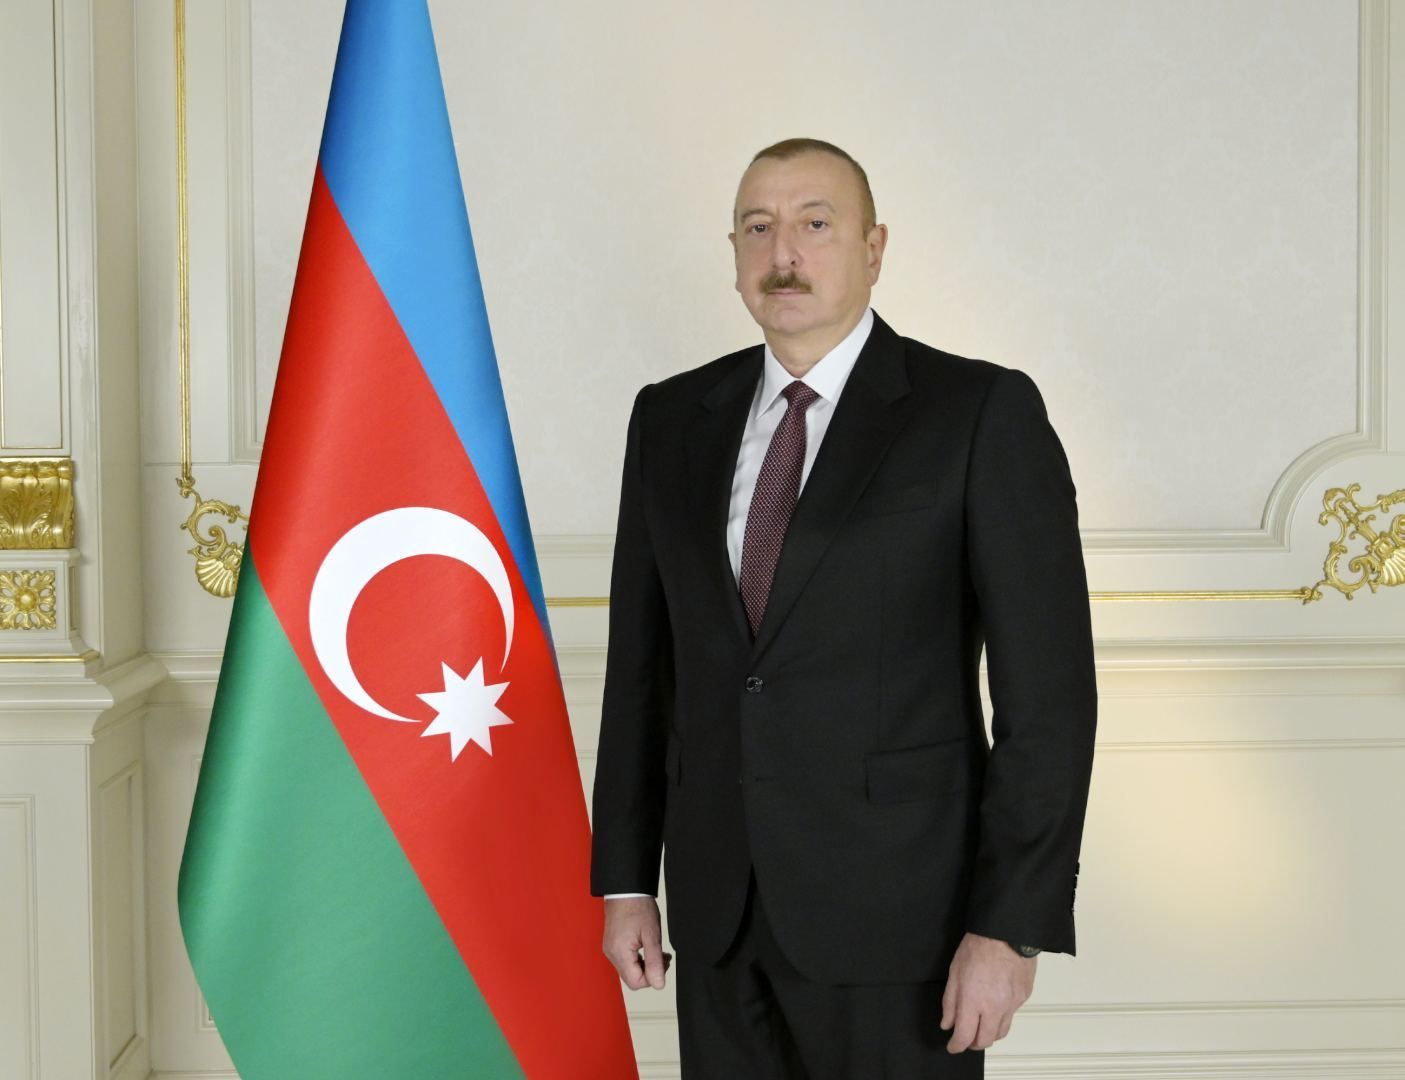 Azerbaijani President shares post on occasion of May 28 - Independence Day [PHOTO]